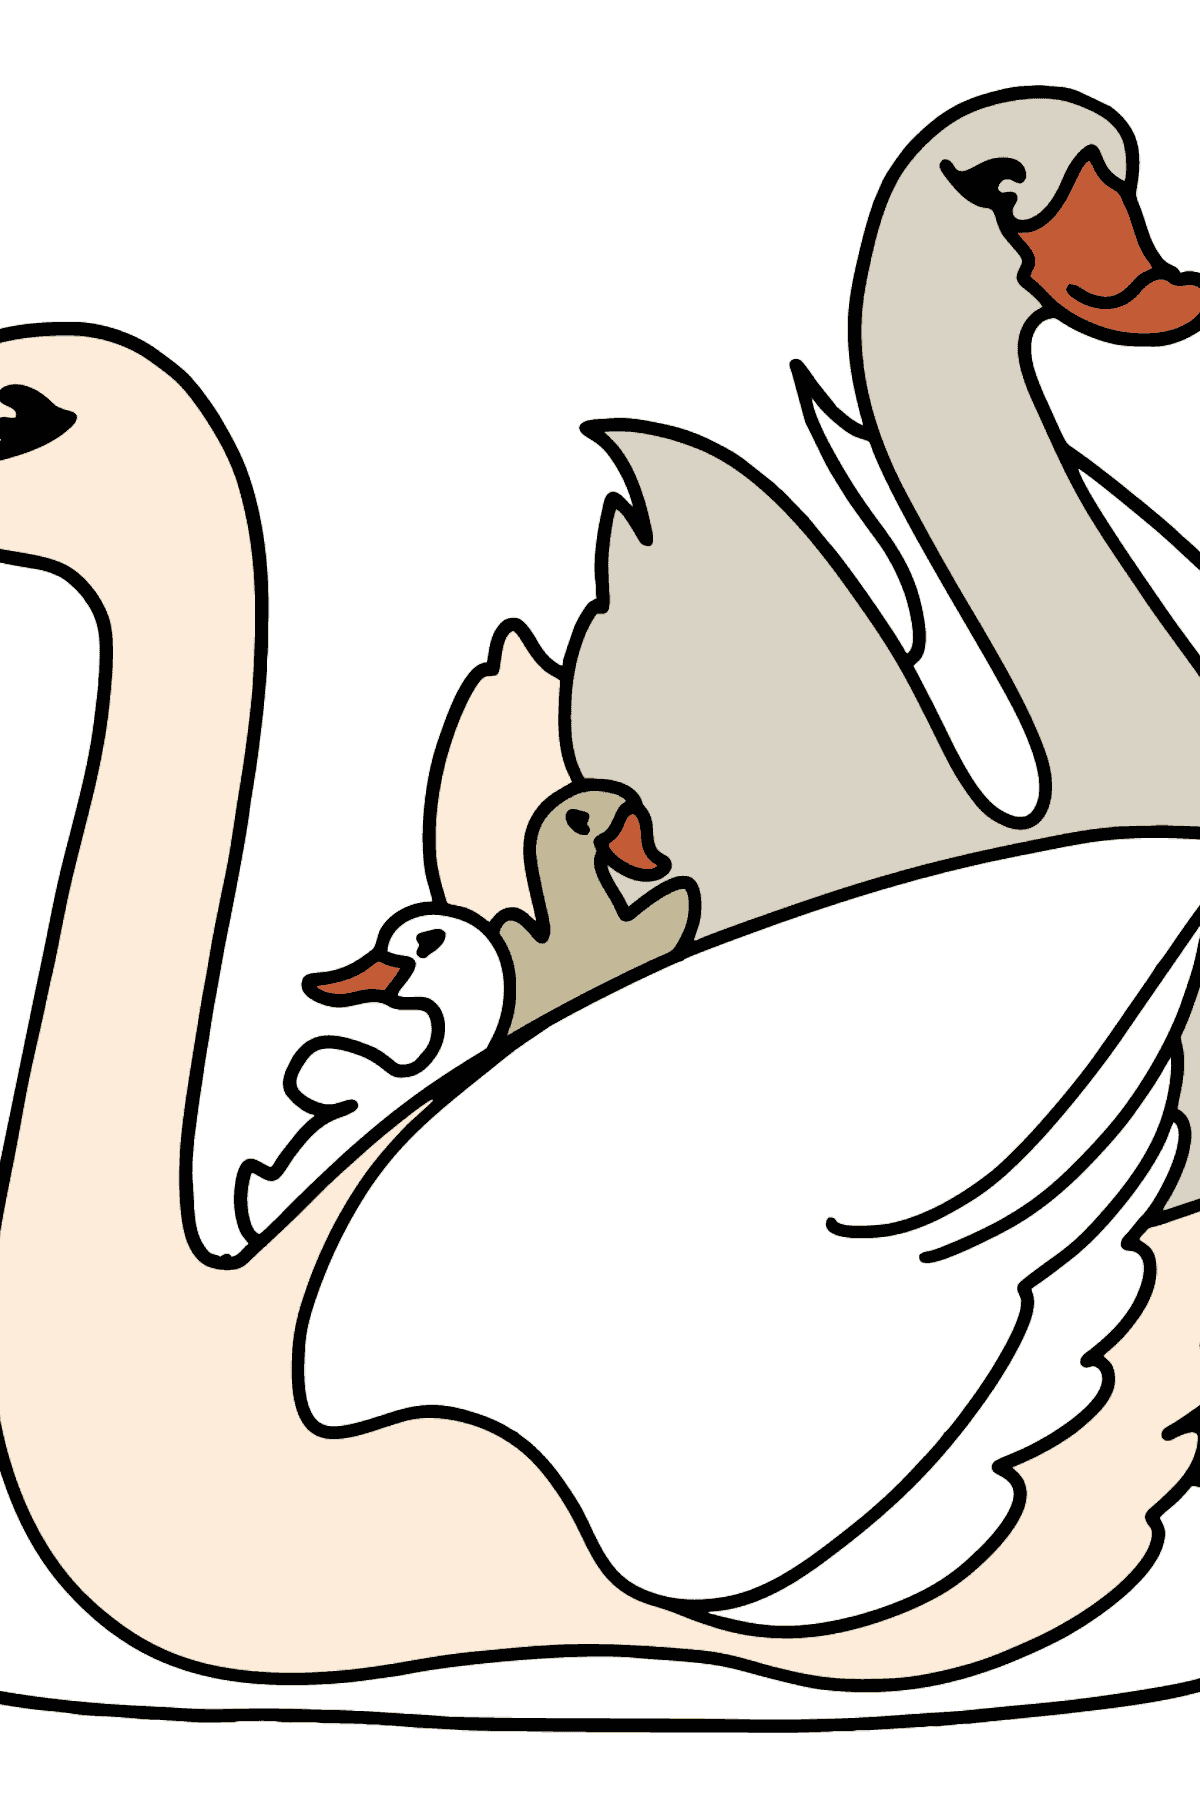 White Swans coloring page - Coloring Pages for Kids